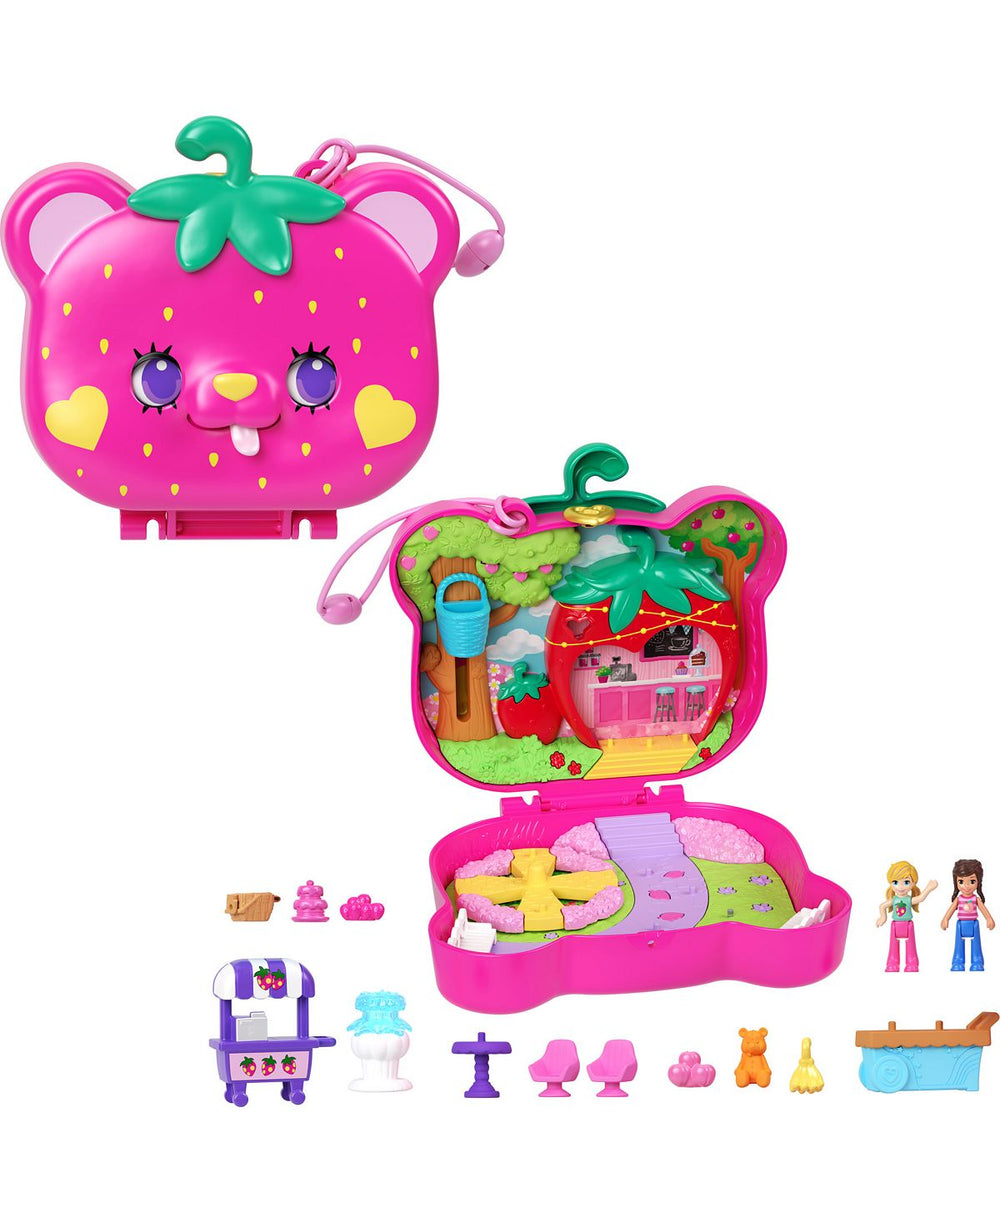 Polly Pocket Straw-Beary Patch Compact Playset with Garden Theme